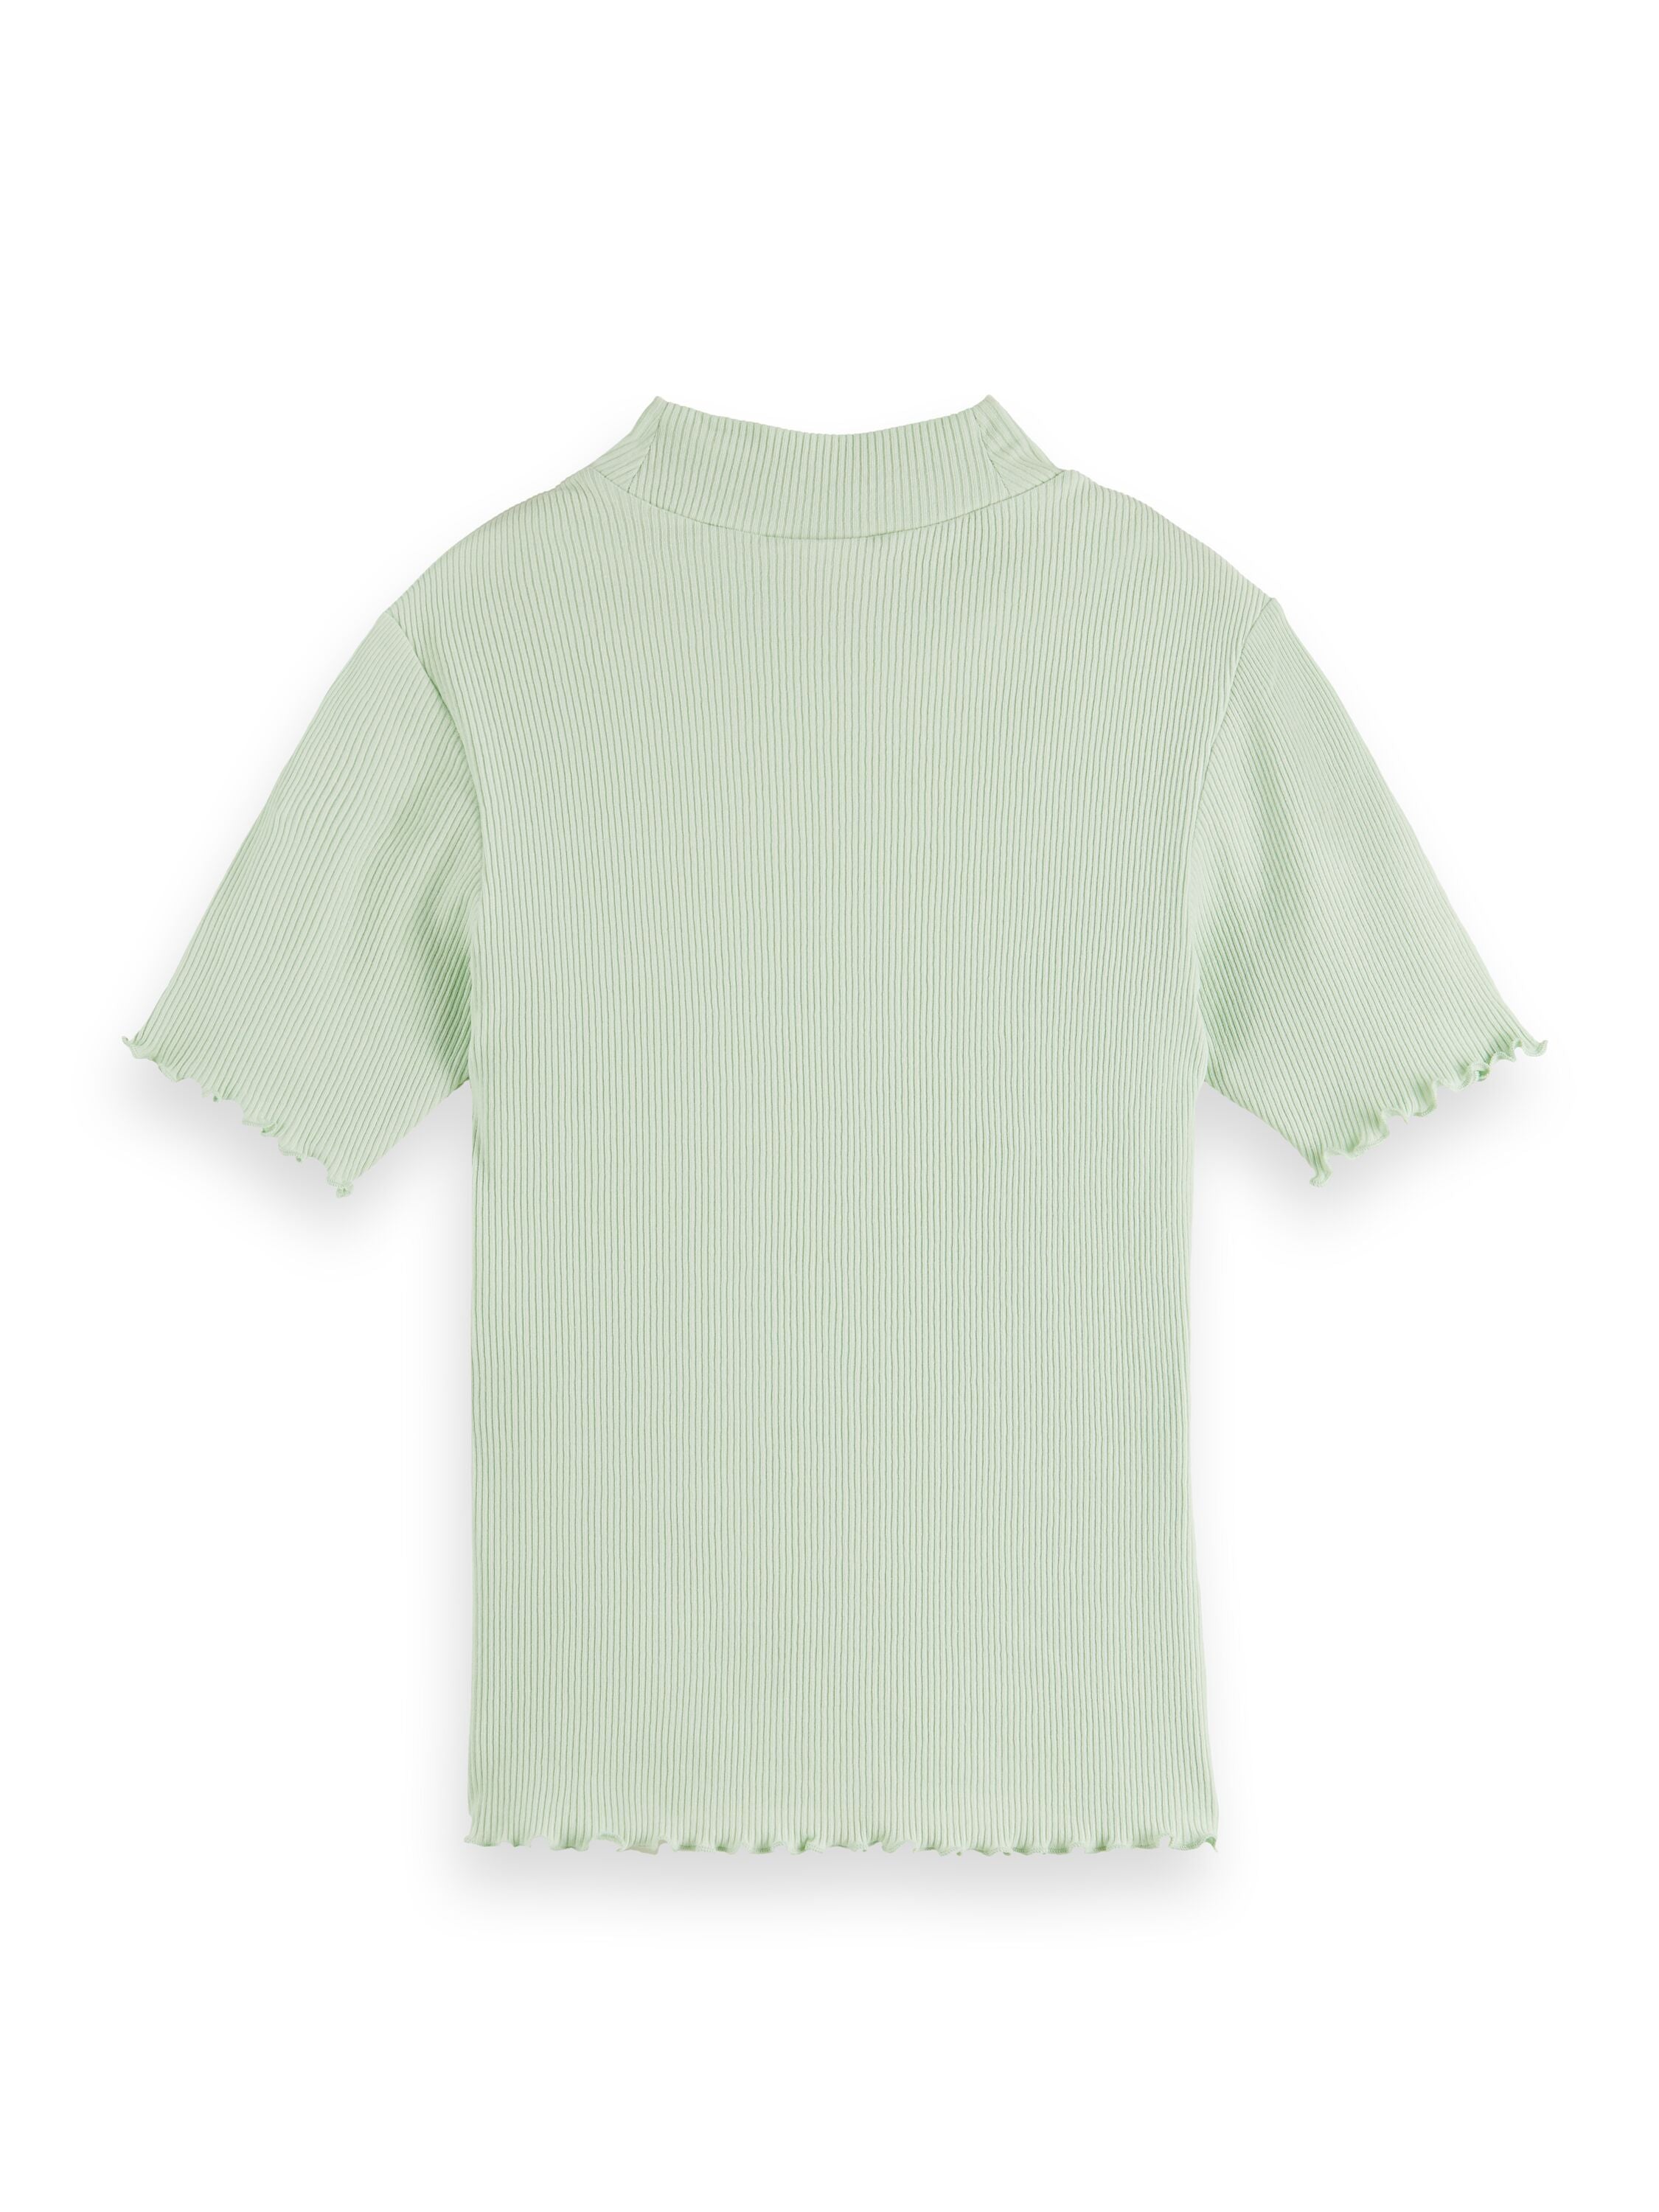 Ribbed mock neck T-shirt in Sea Green